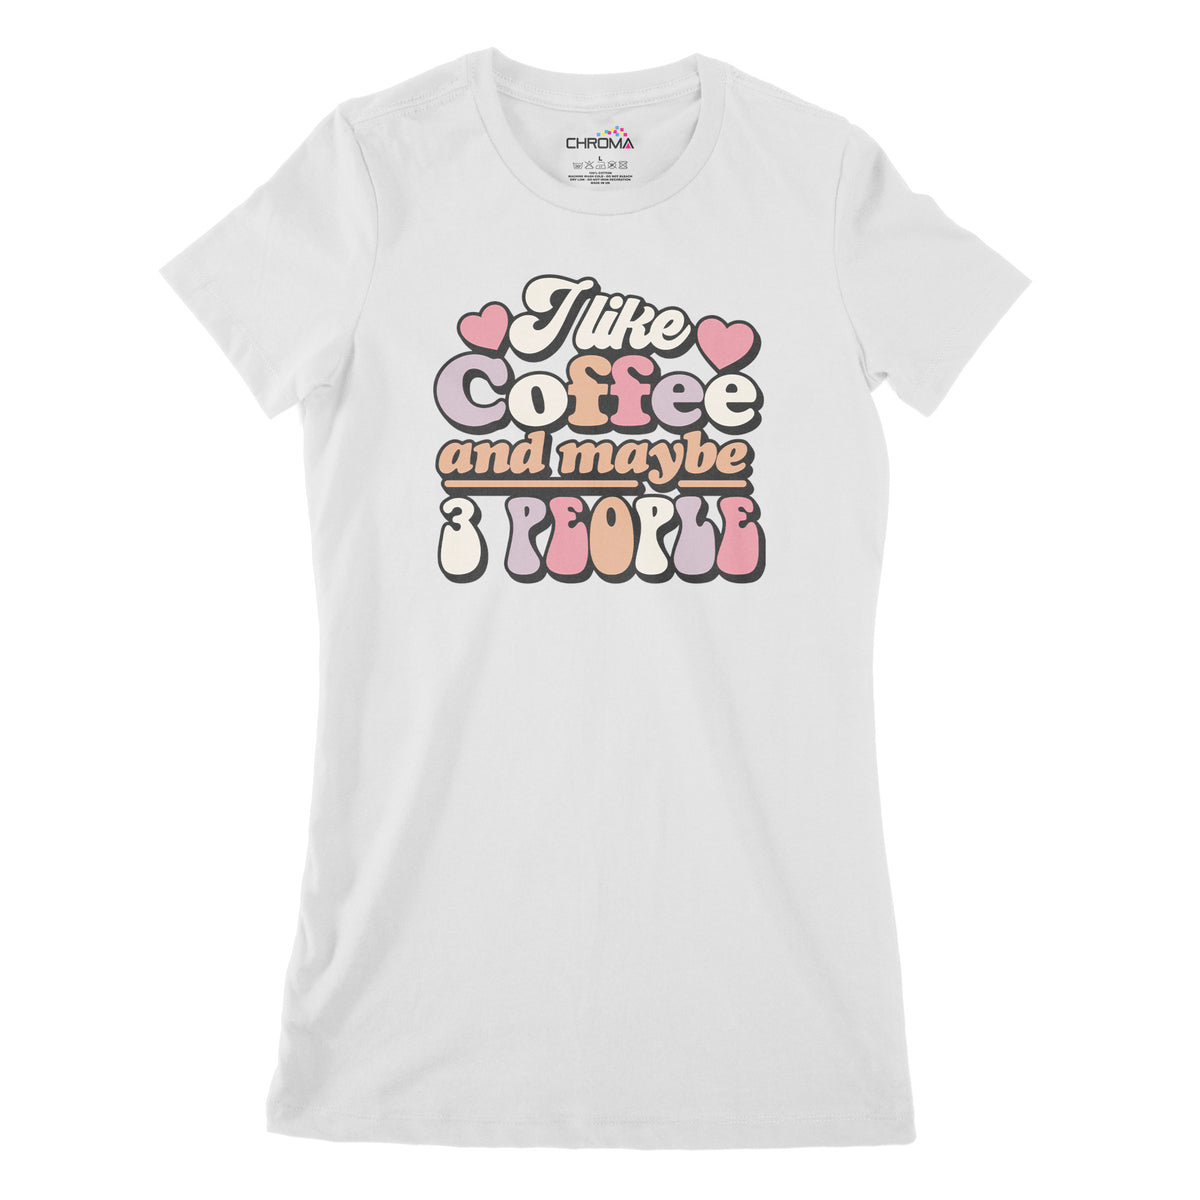 I Like Coffee And Maybe 3 People | Women's Classic Fitted T-Shirt Chroma Clothing